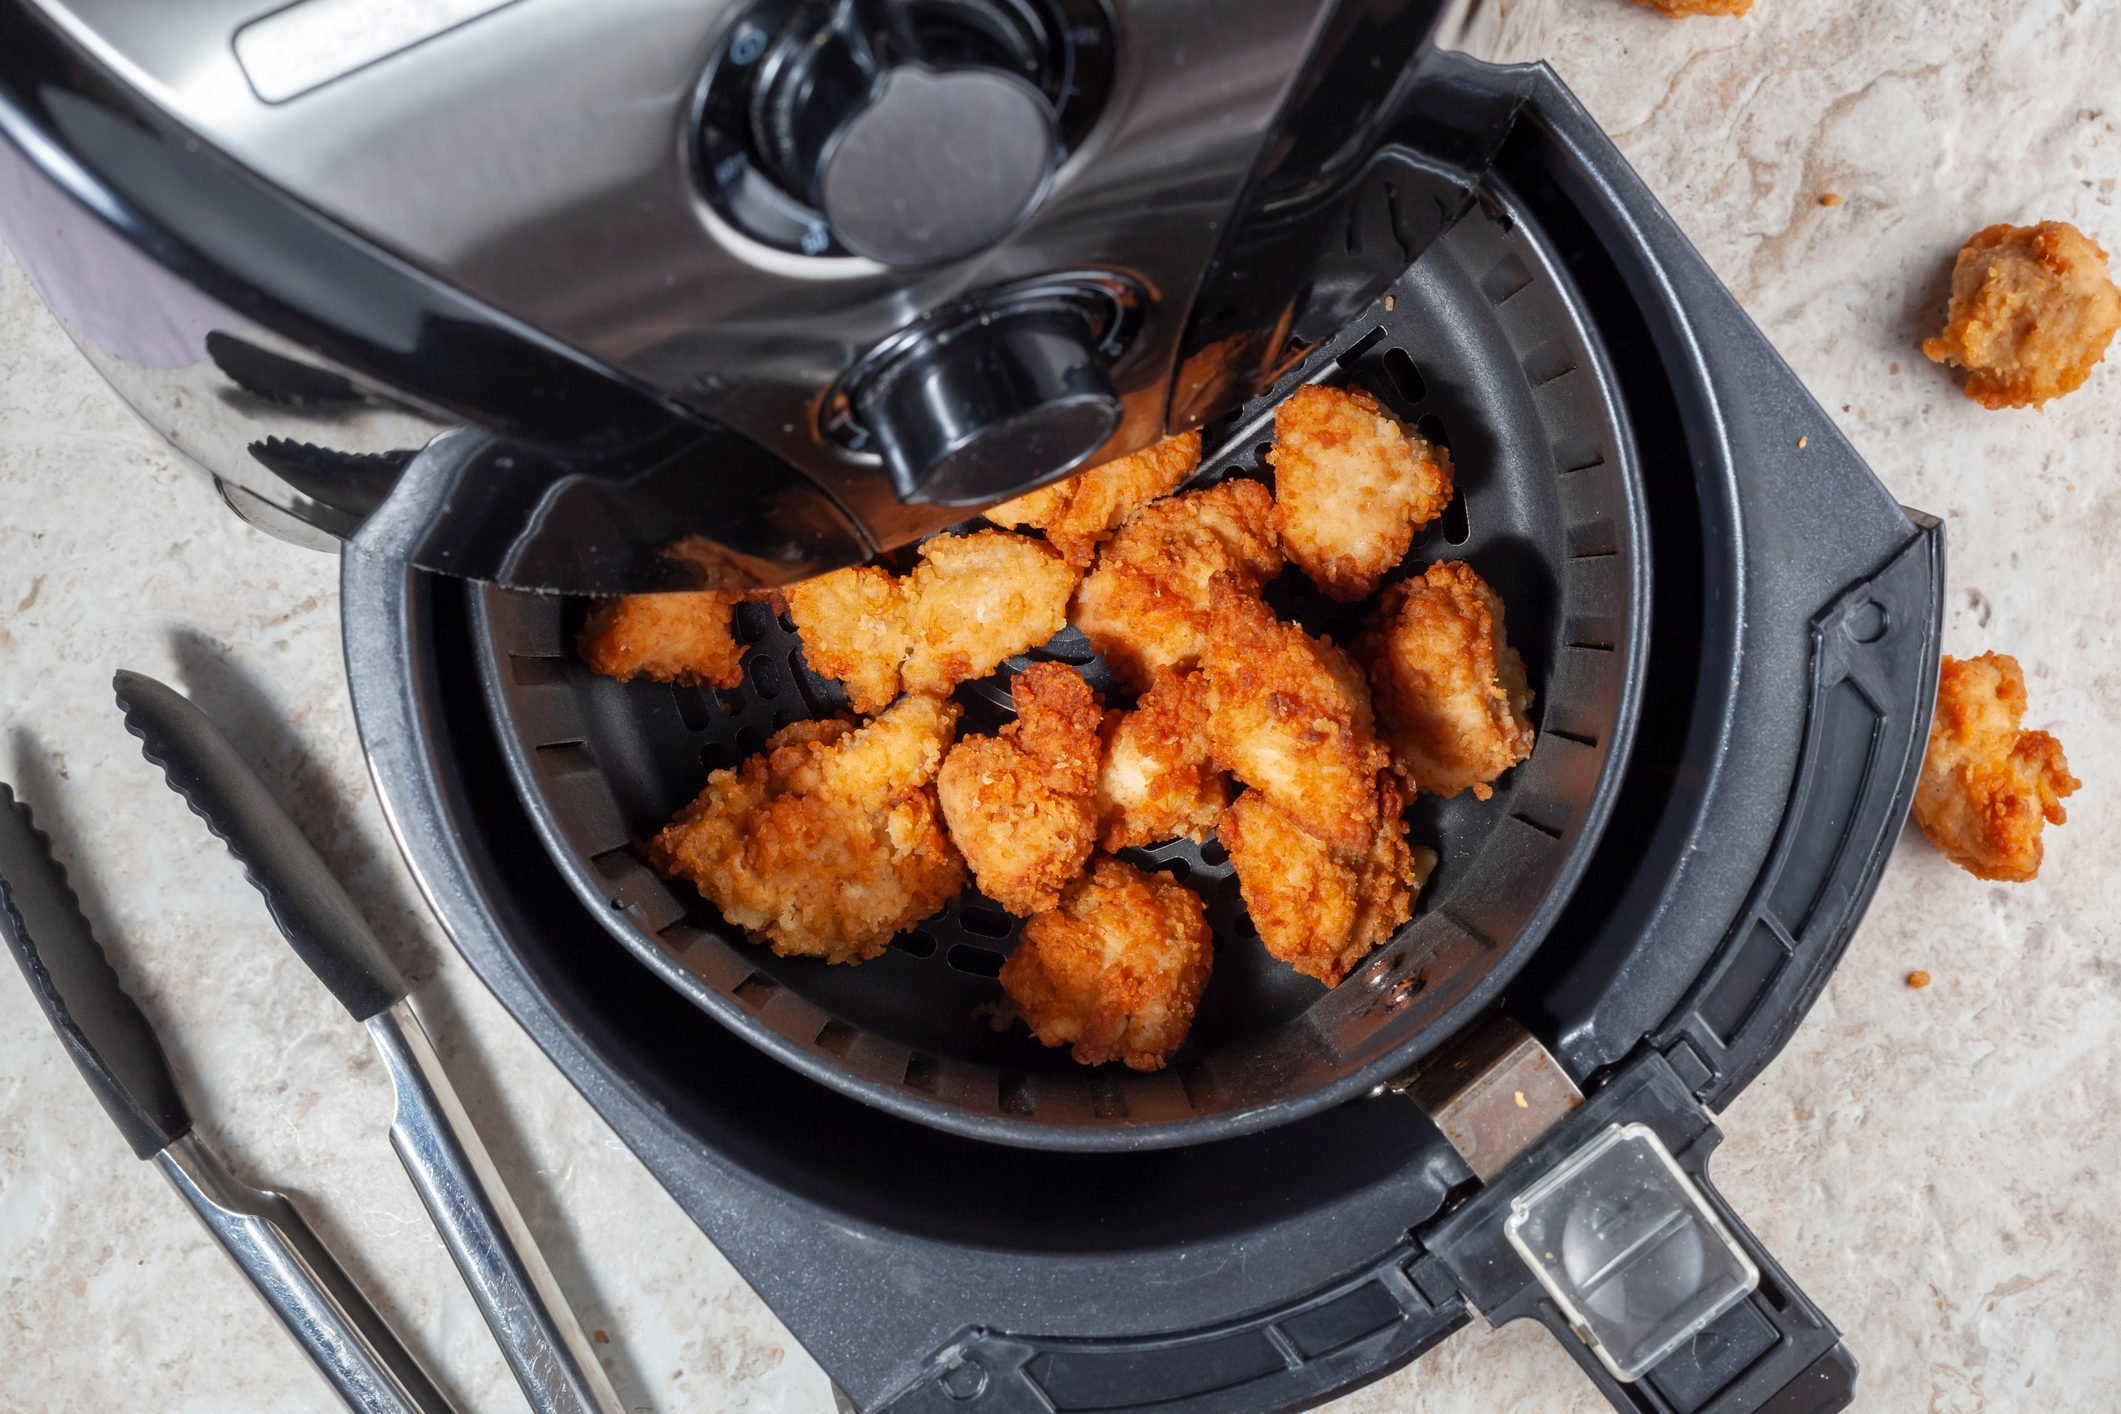 How Does an Air Fryer Work, Exactly? - Reader's Digest